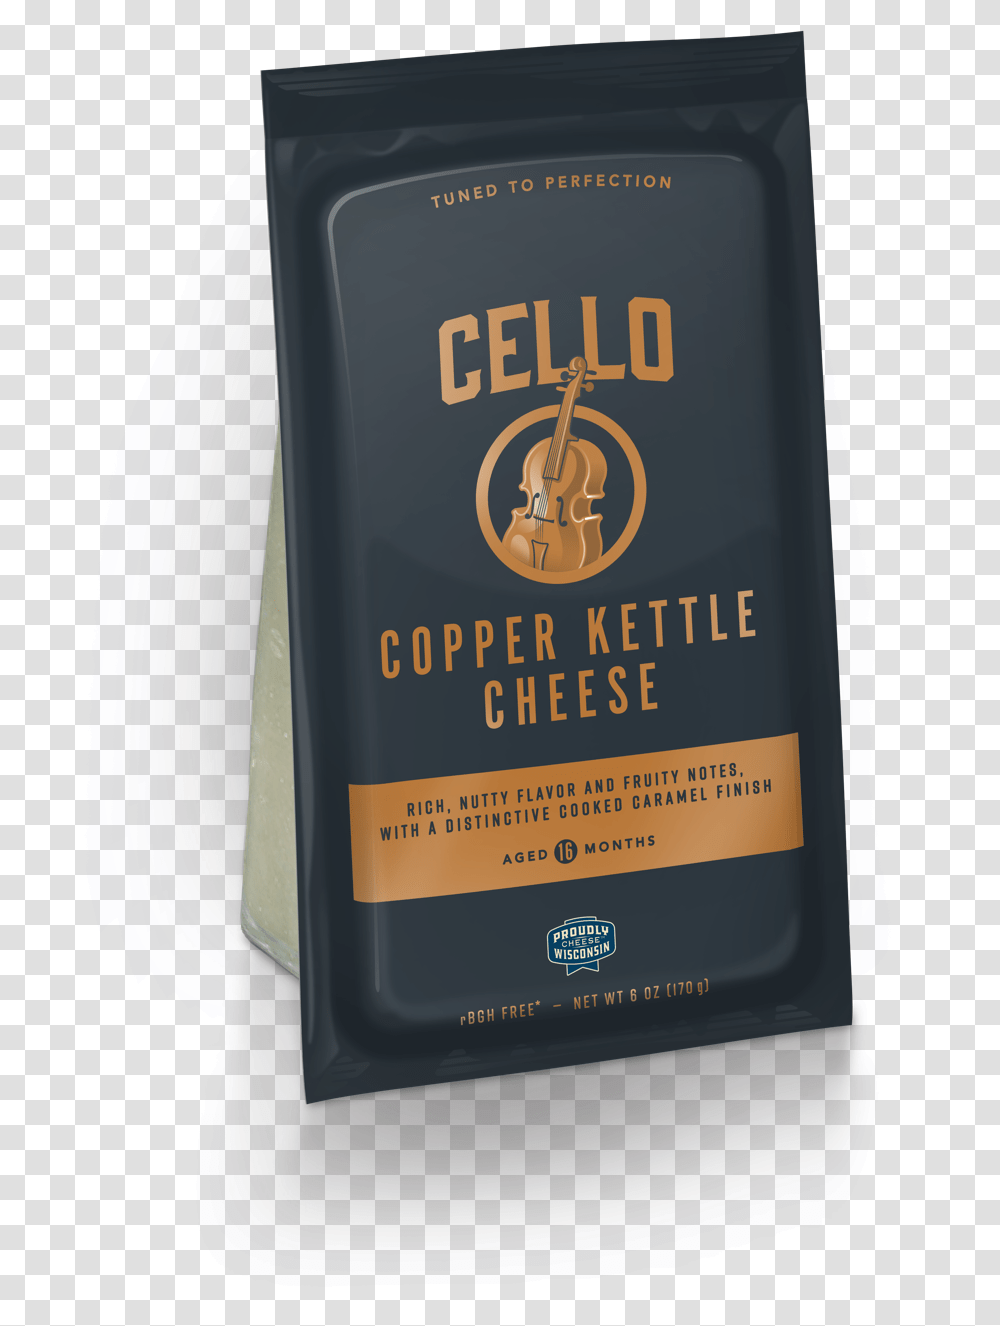 Cello Copper Kettle Cheese Packaging And Labeling, Bottle, Cosmetics, Beverage, Liquor Transparent Png